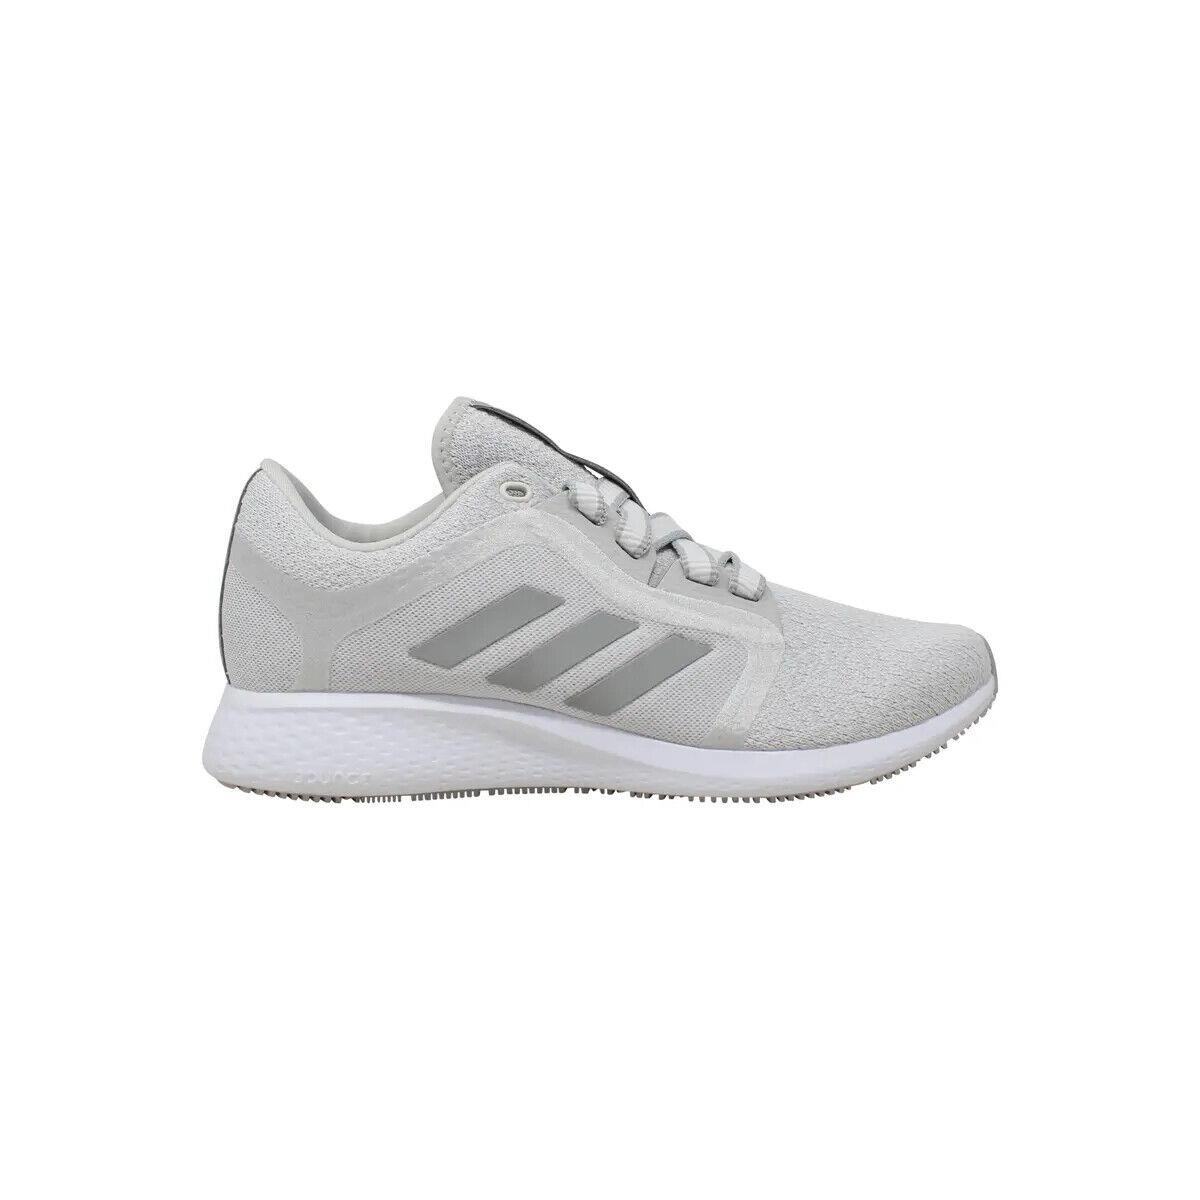 Adidas Edge Luxe 4 G58477 Womens White Athletic Running Shoes Size US 9.5 TV1007